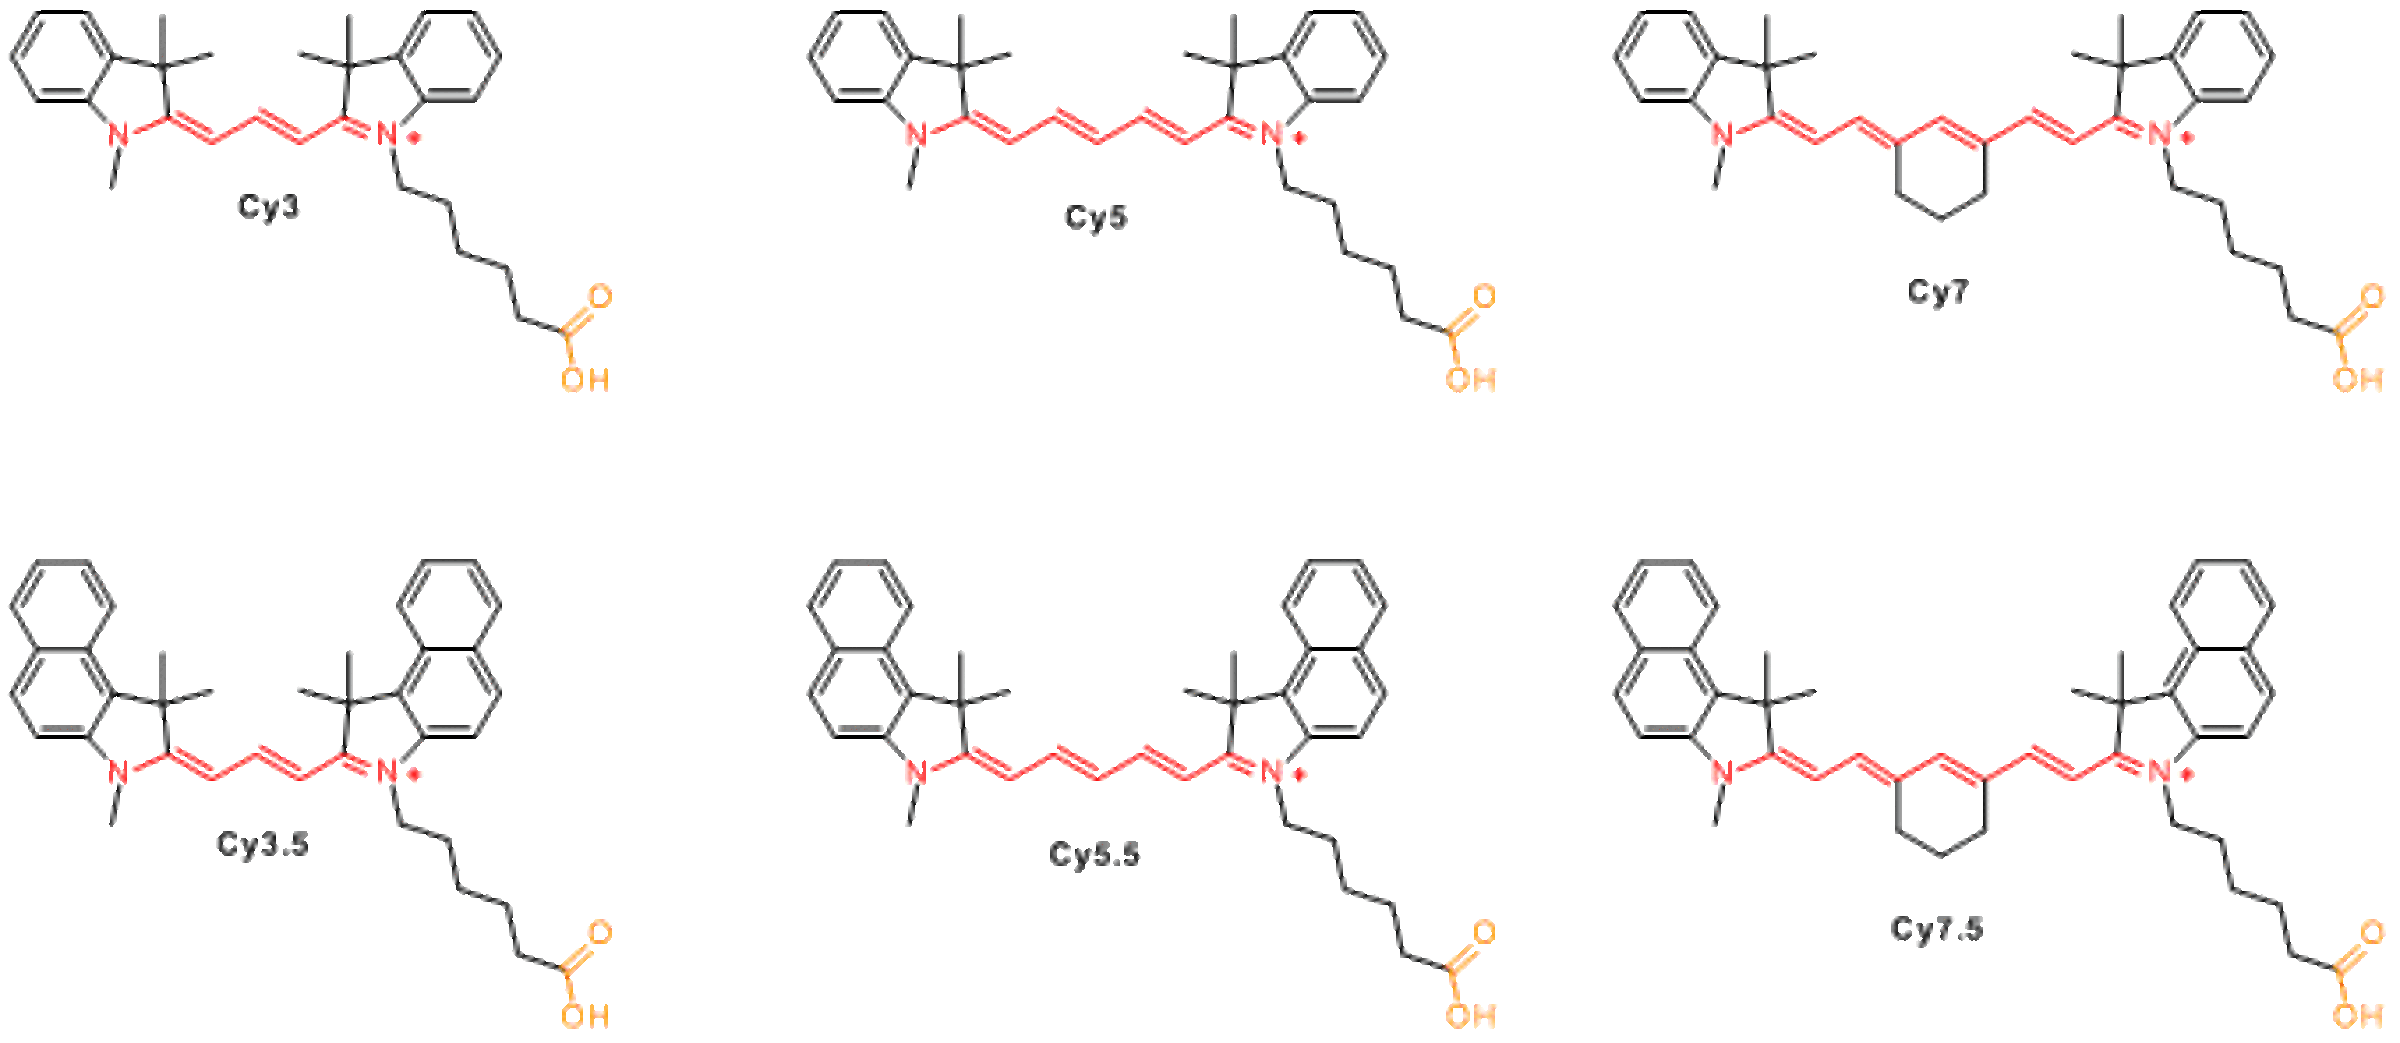 Structures of non-sulfonated cyanine dyes from Lumiprobe